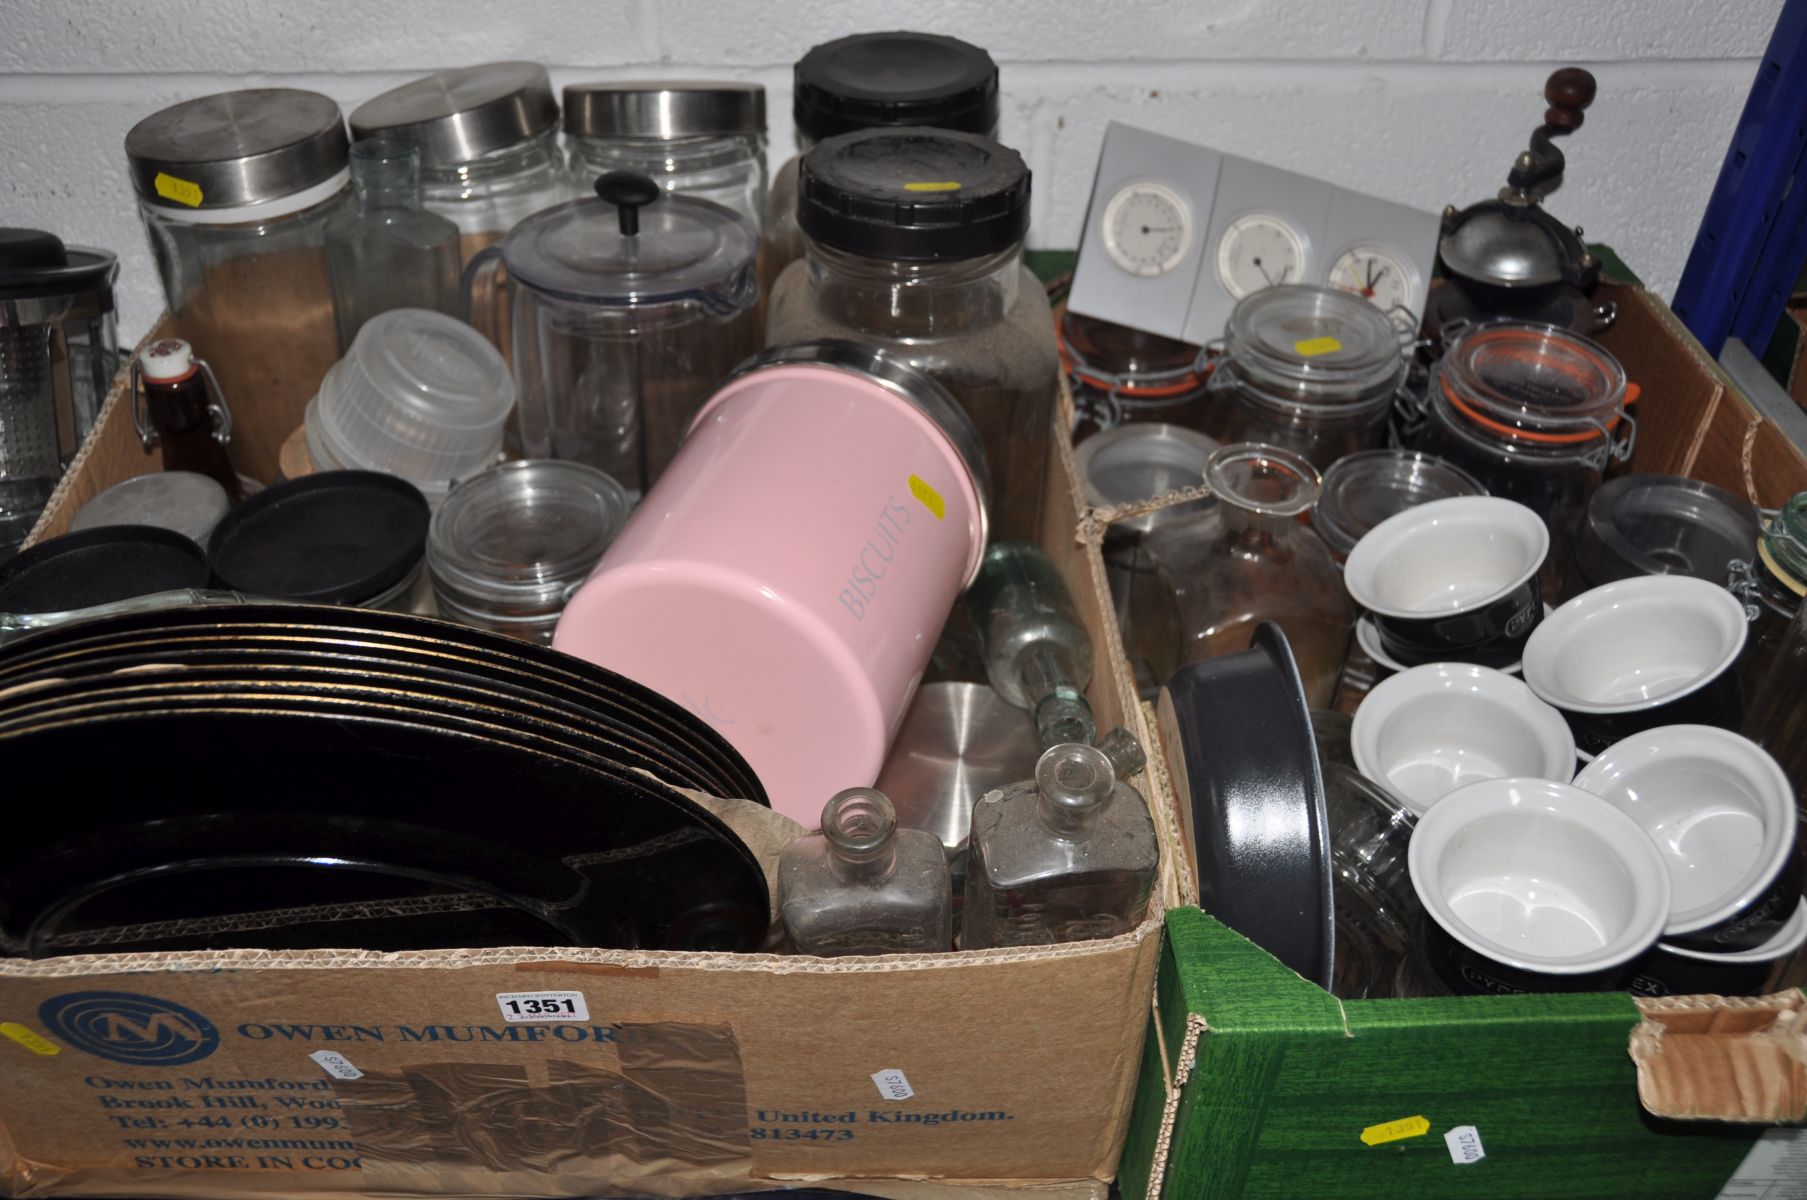 THREE BOXES AND LOOSE KITCHEN GLASSWARE, ETC, including Pyrex mixing bowls, glass and ceramic - Image 3 of 3